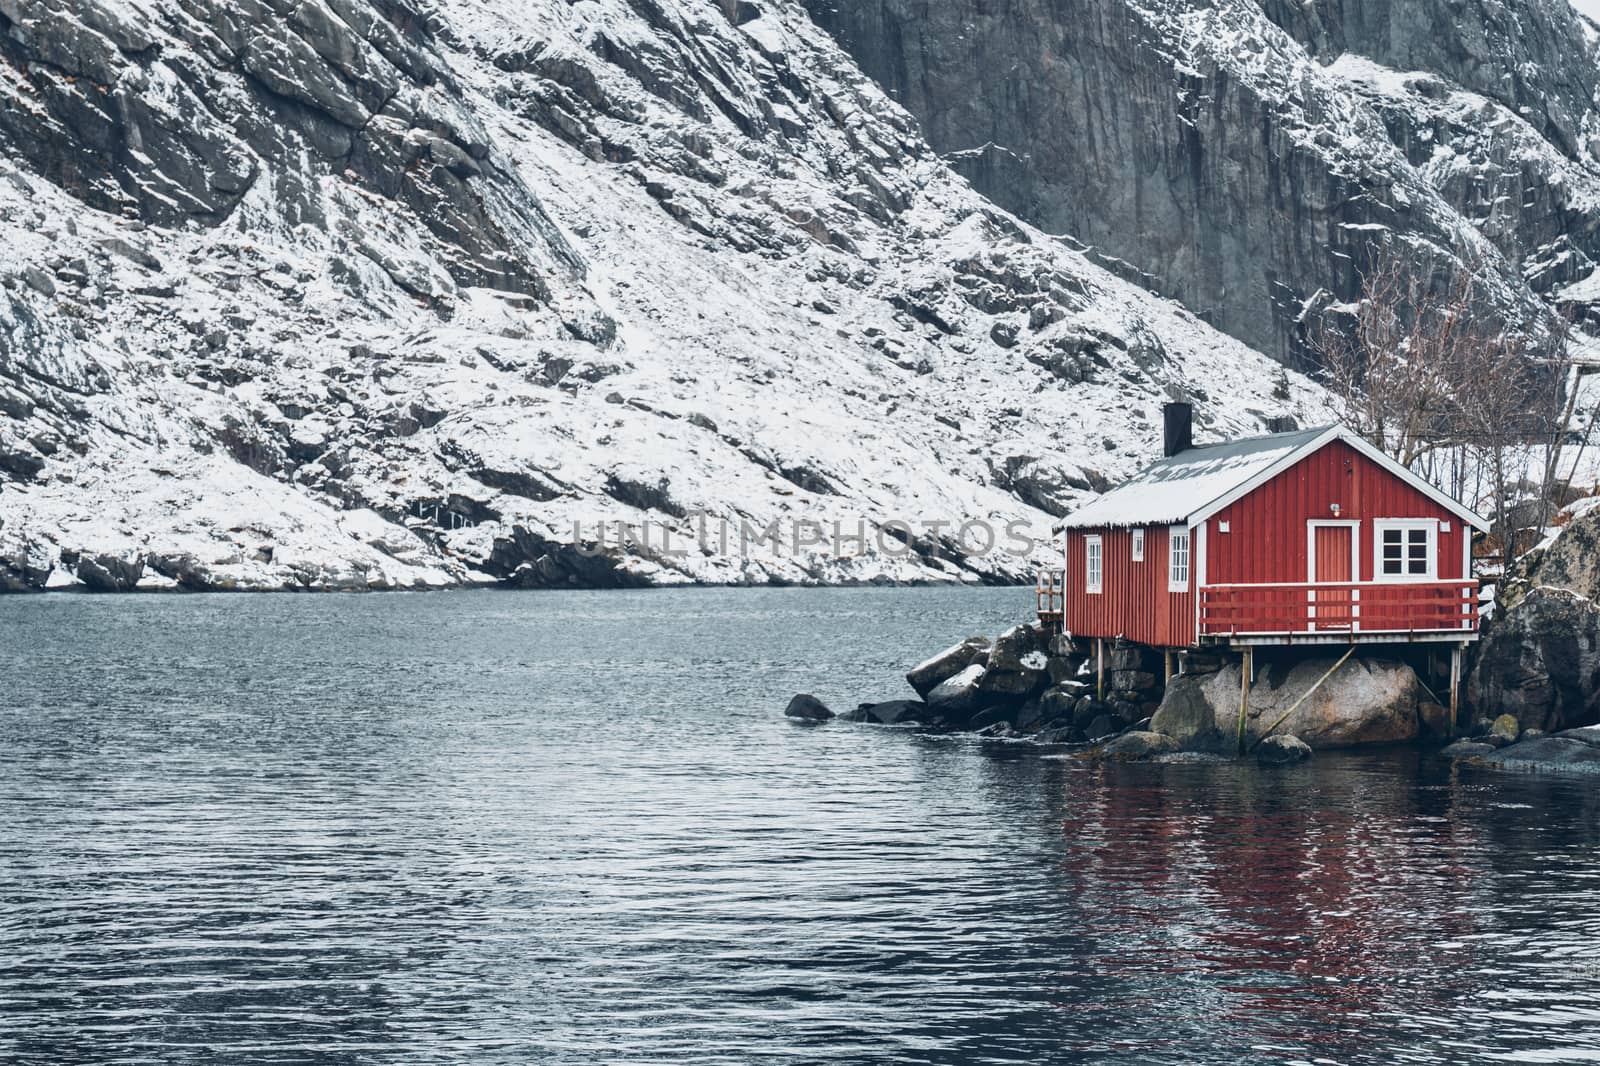 Nusfjord fishing village in Norway by dimol